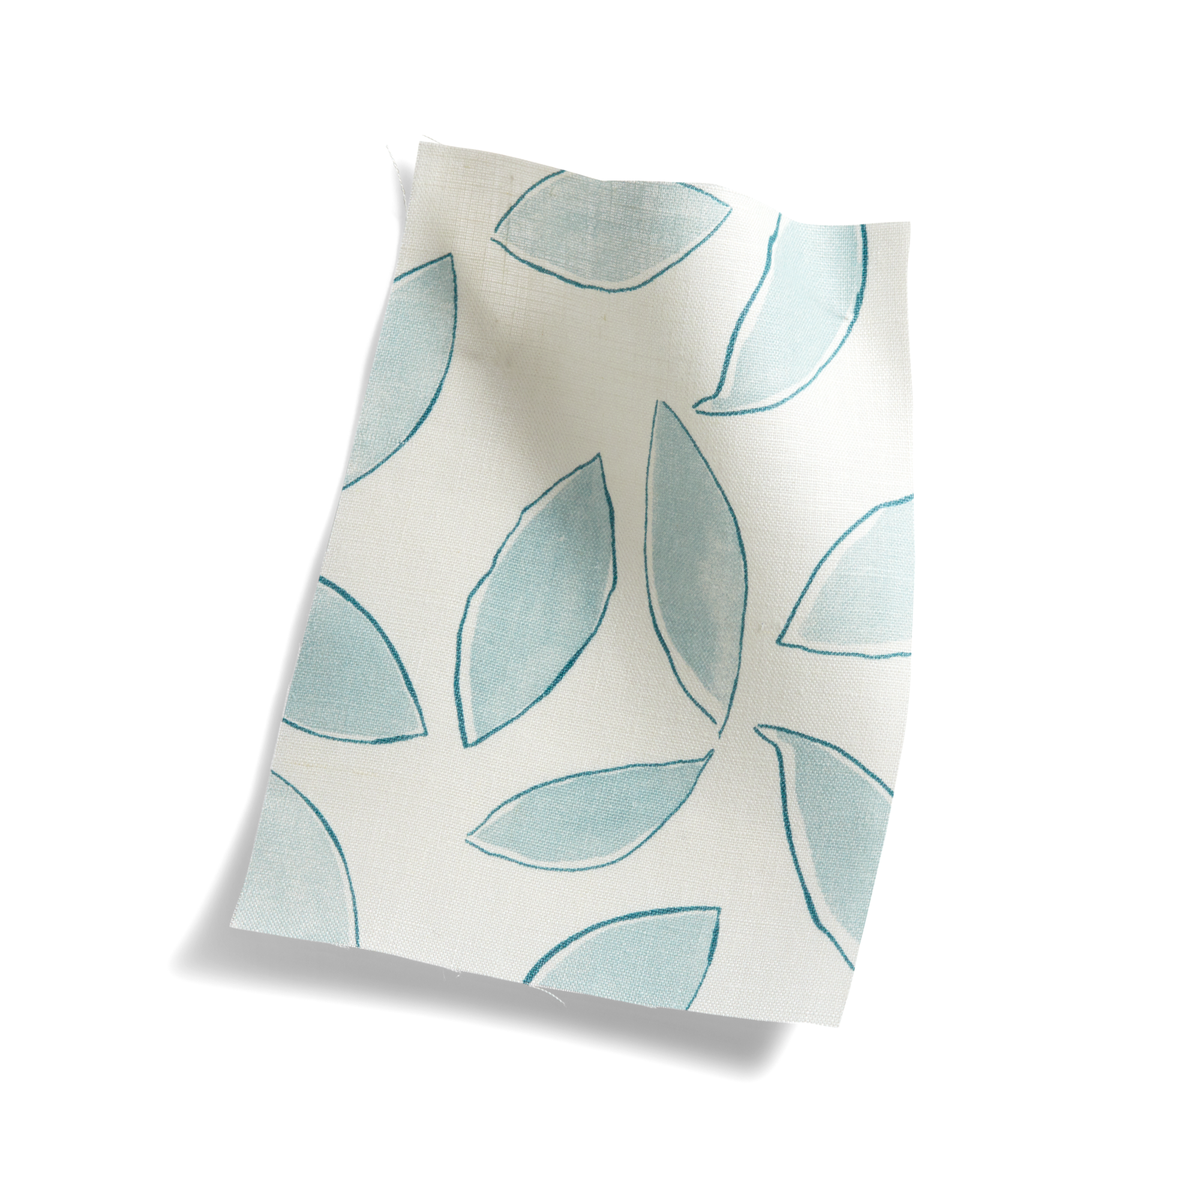 Leaves Fabric in Marine & Ice